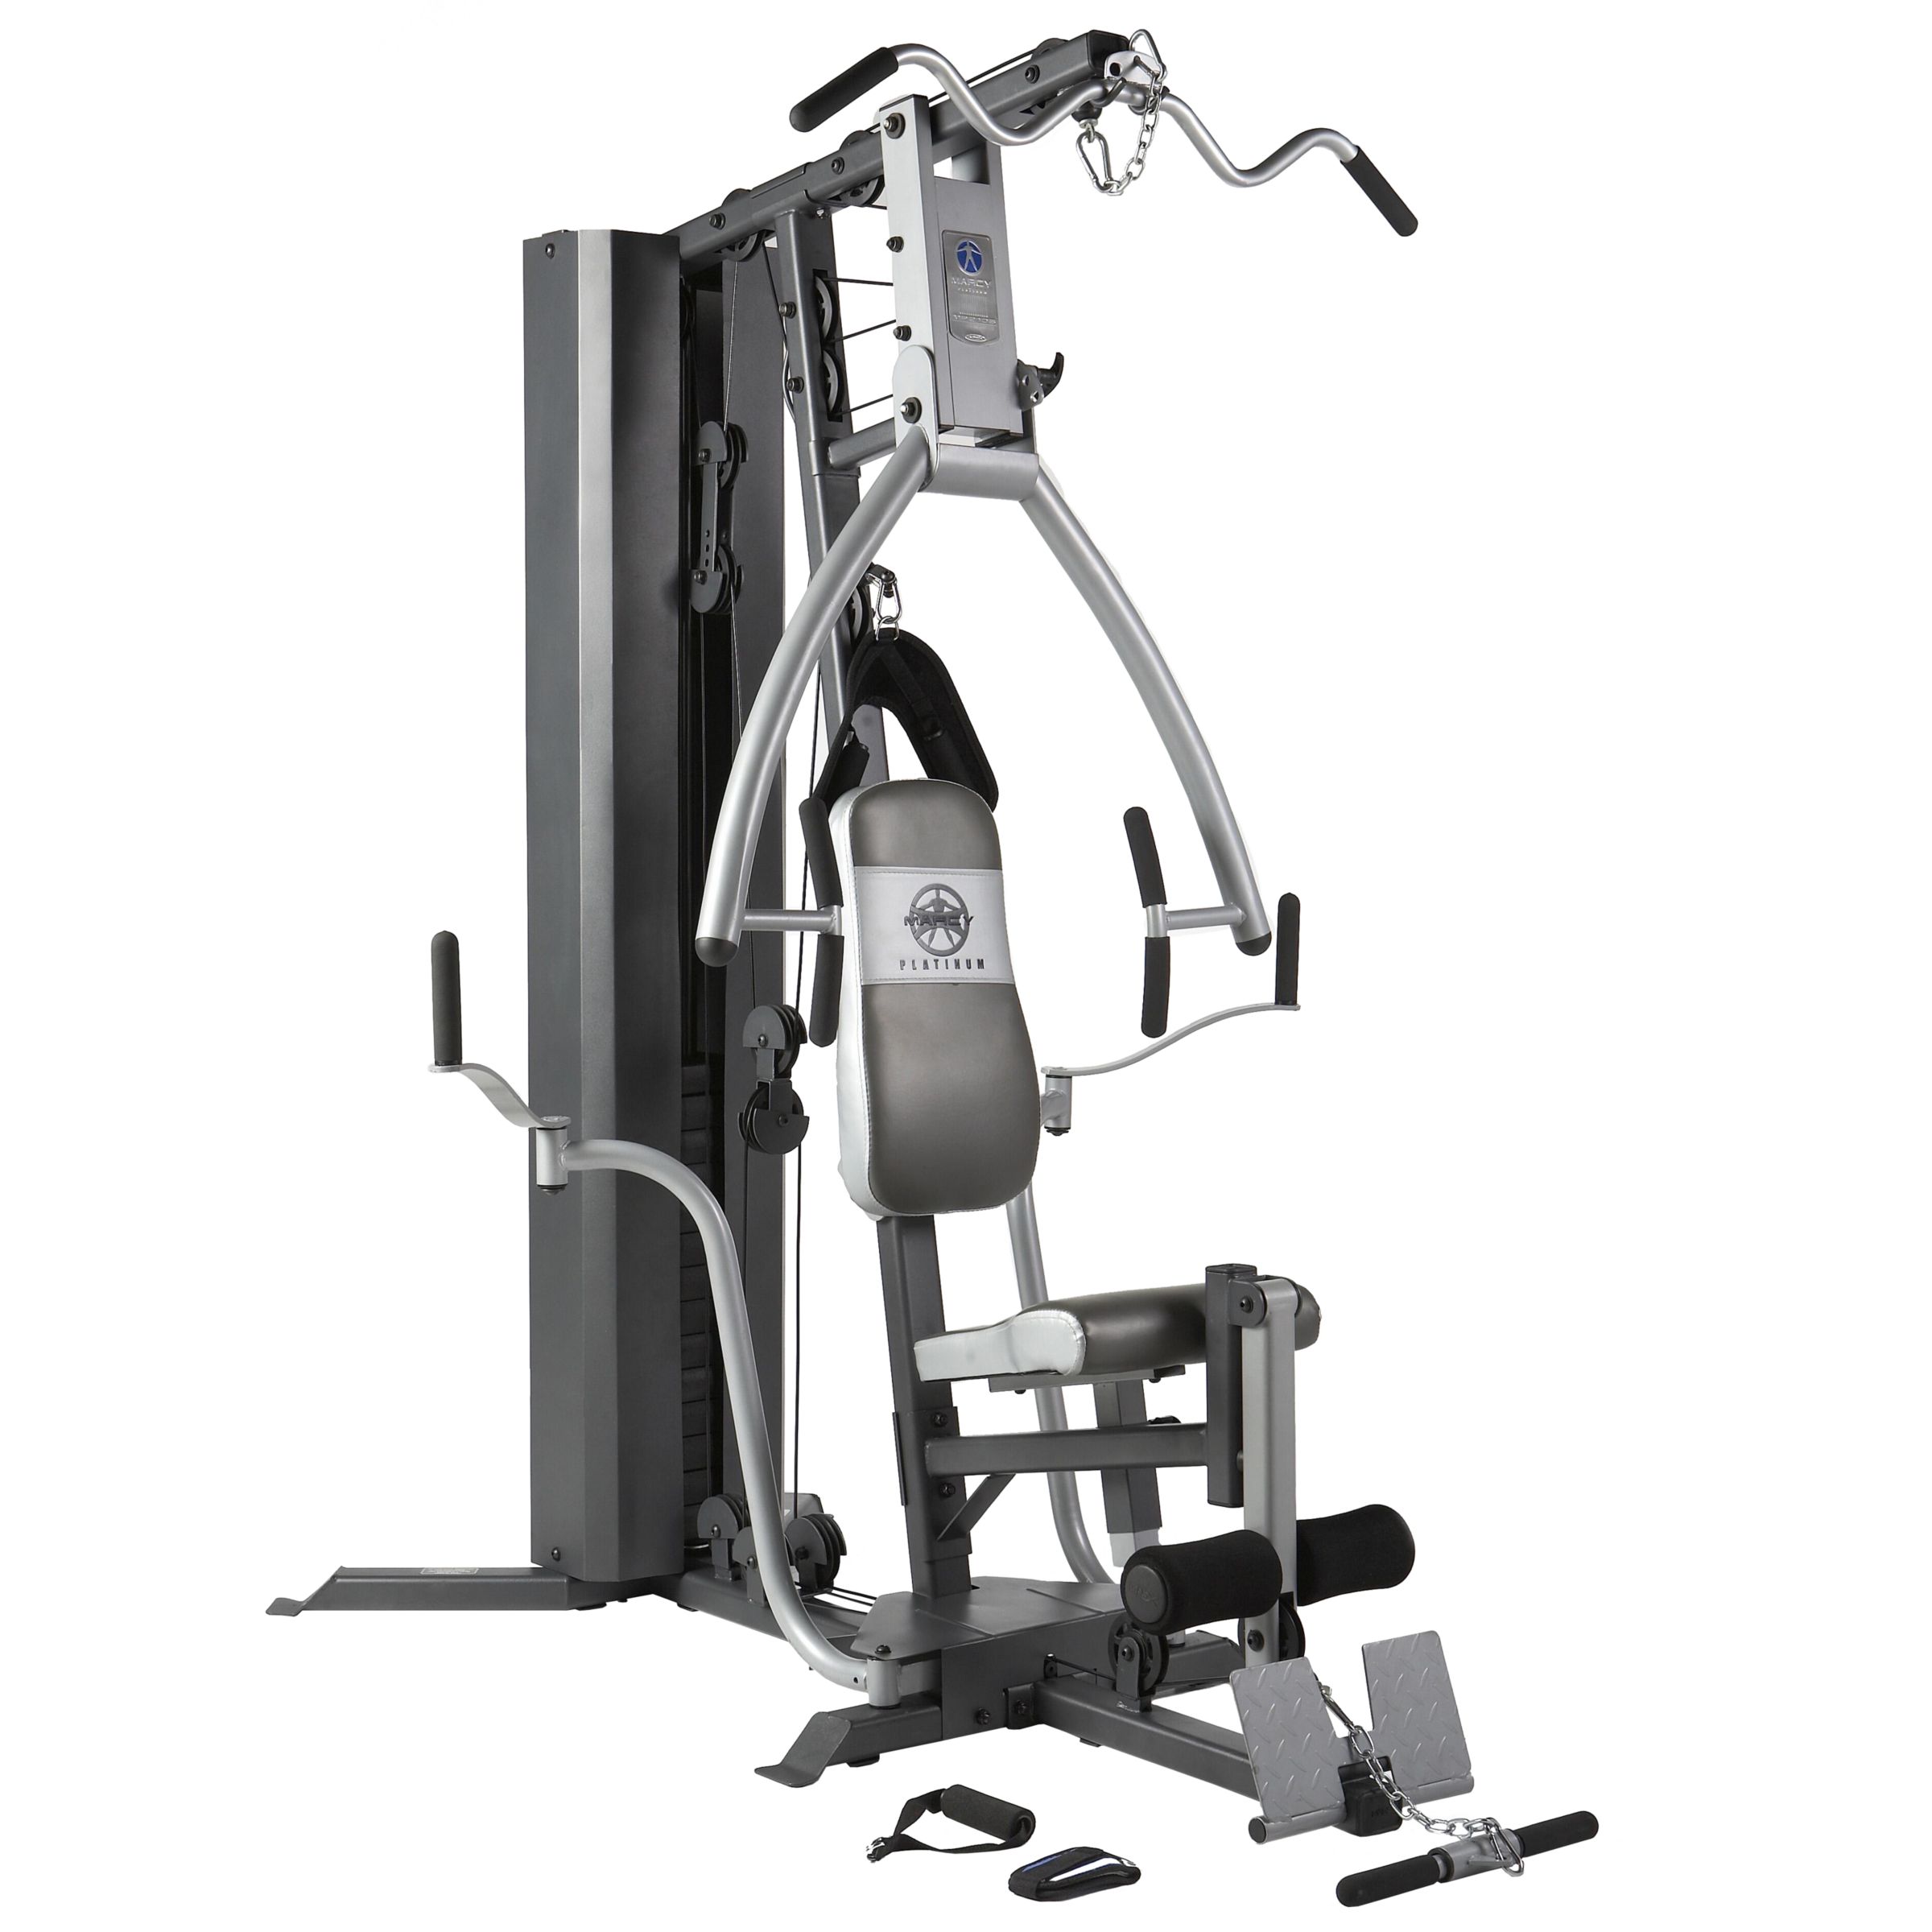 Marcy MP2106 Multi Gym at JohnLewis